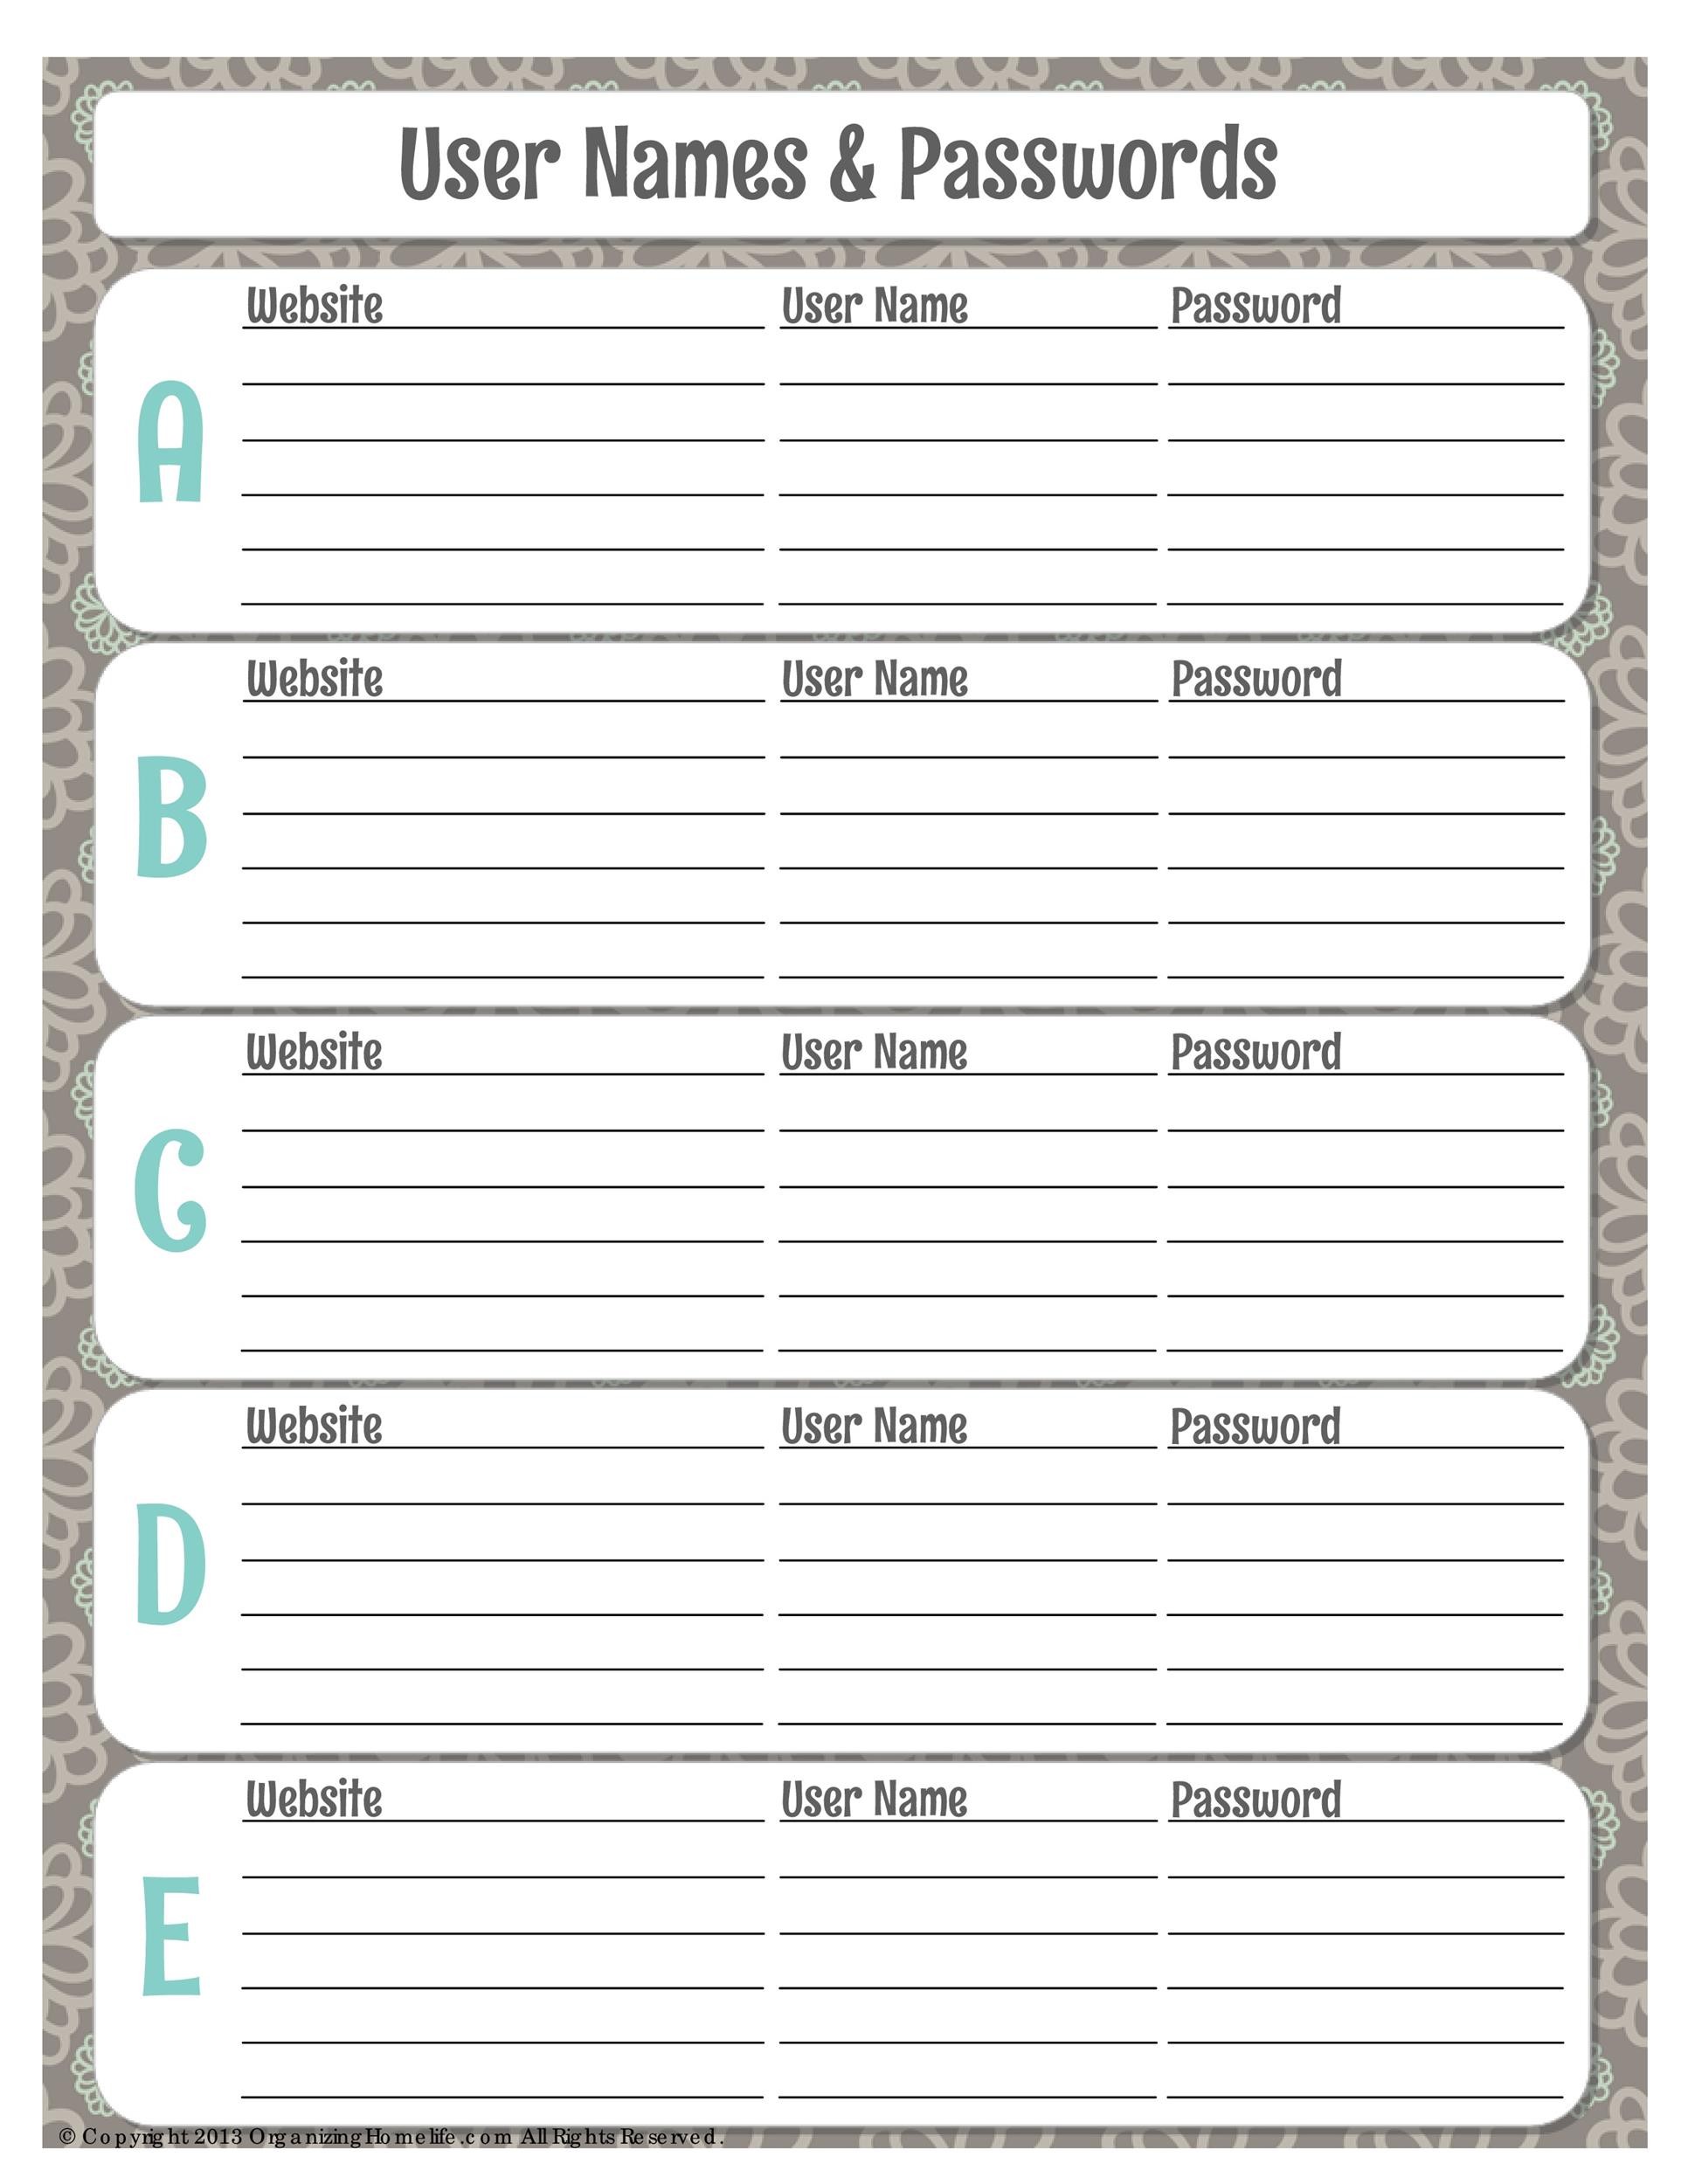 password-log-template-10-free-printable-word-excel-pdf-formats